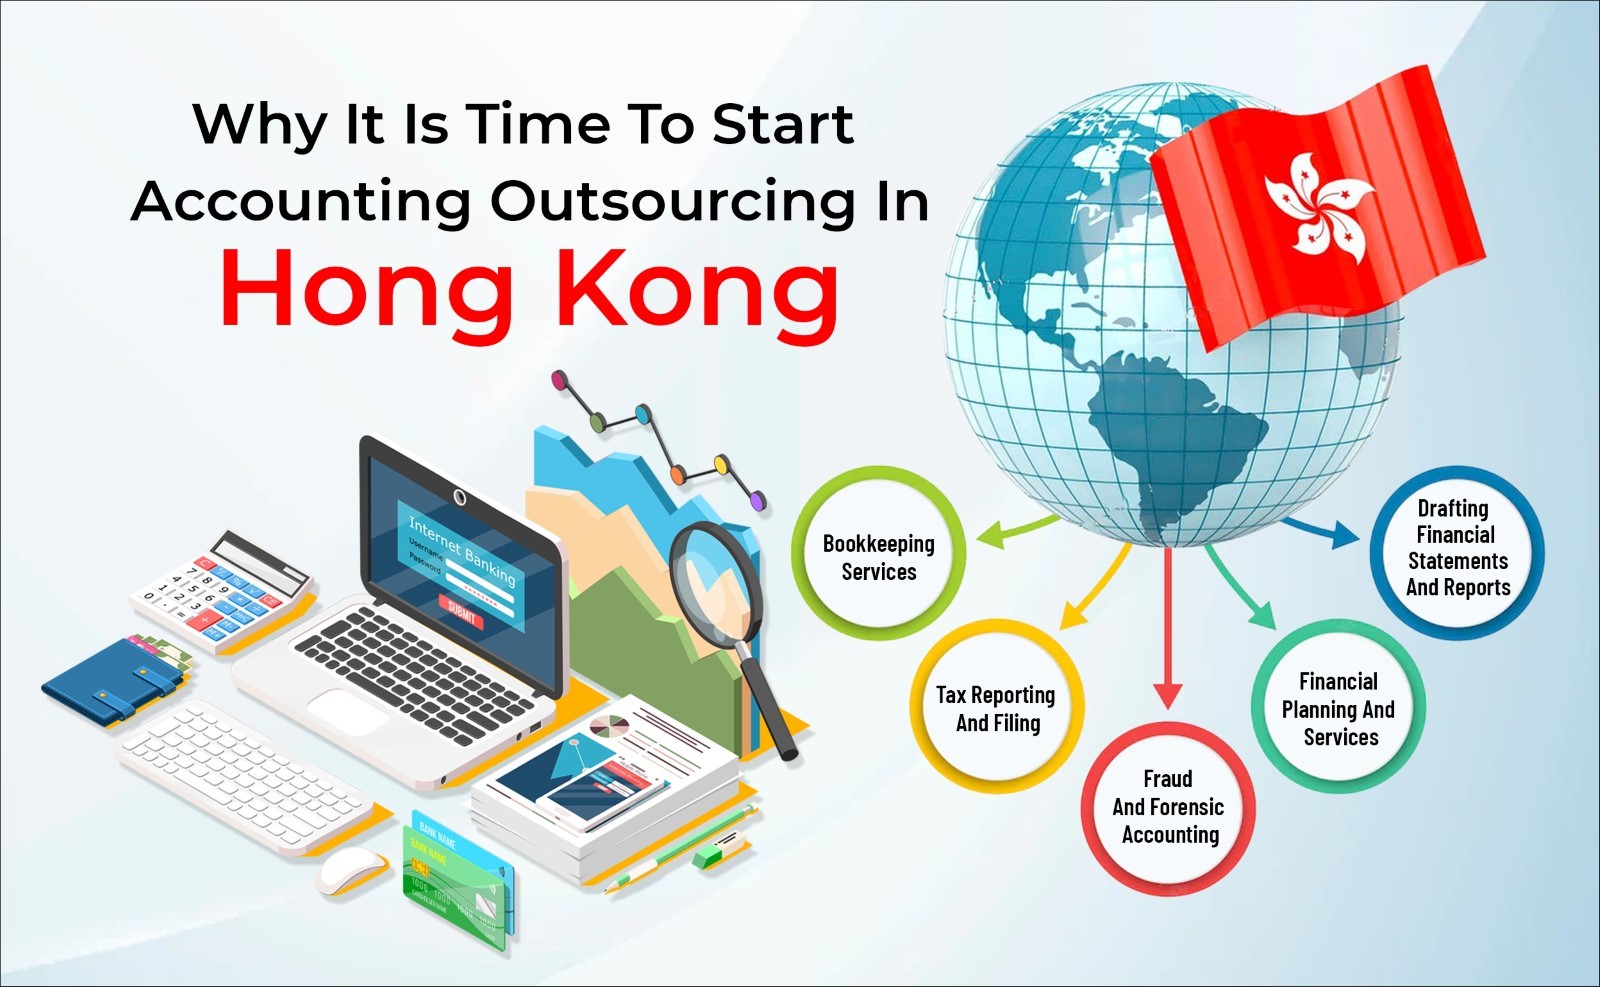 Why It Is Time to Start Accounting Outsourcing in Hong Kong